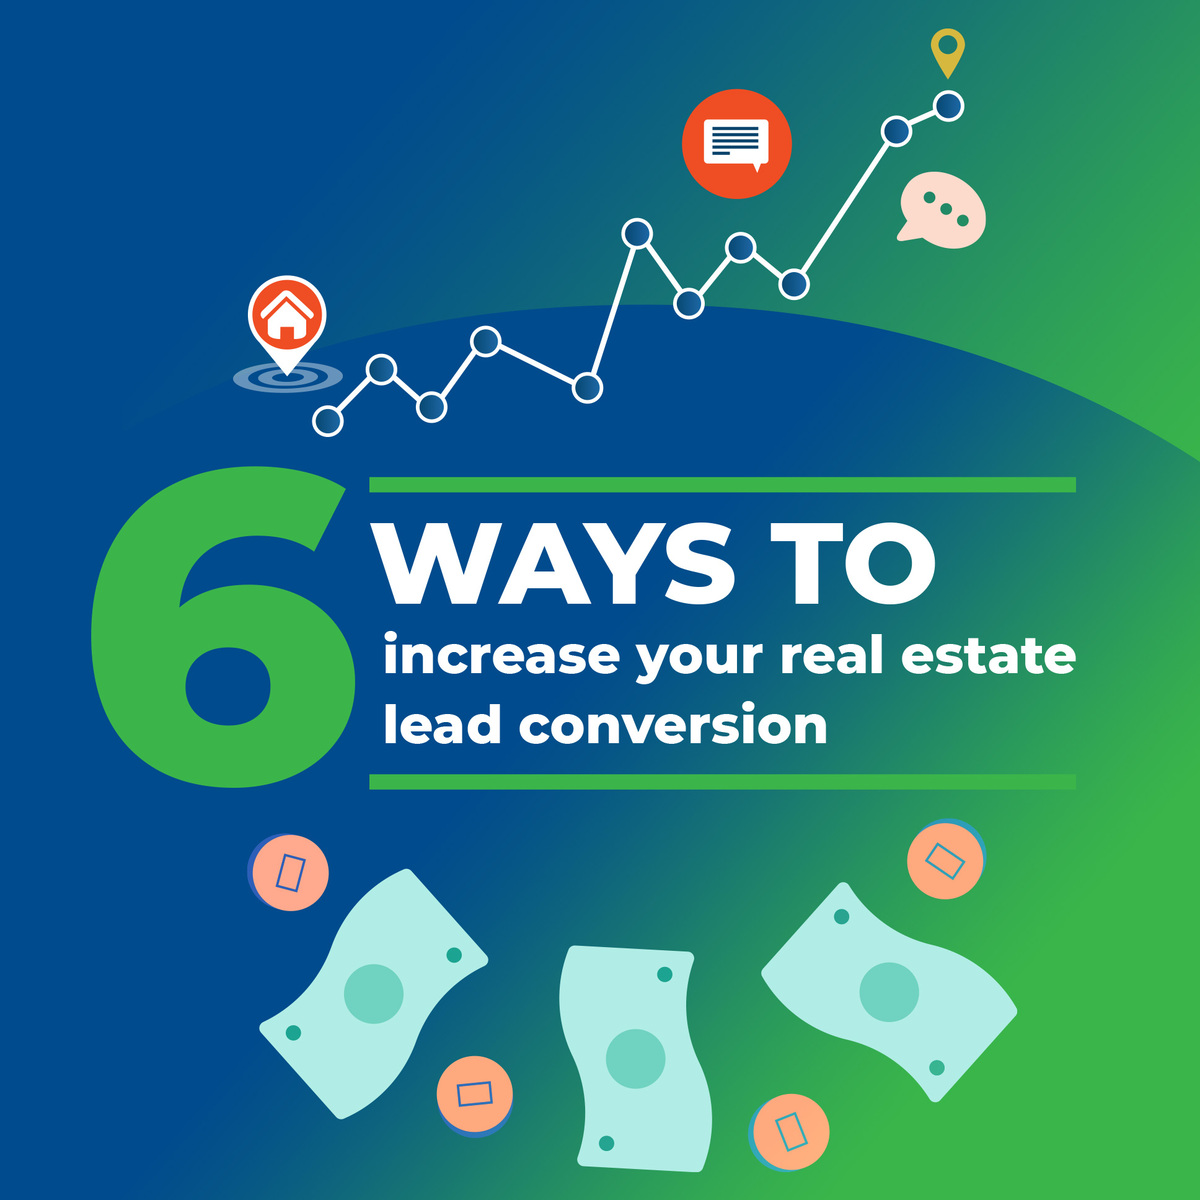 6 Ways To Increase Your Real Estate Lead Conversion